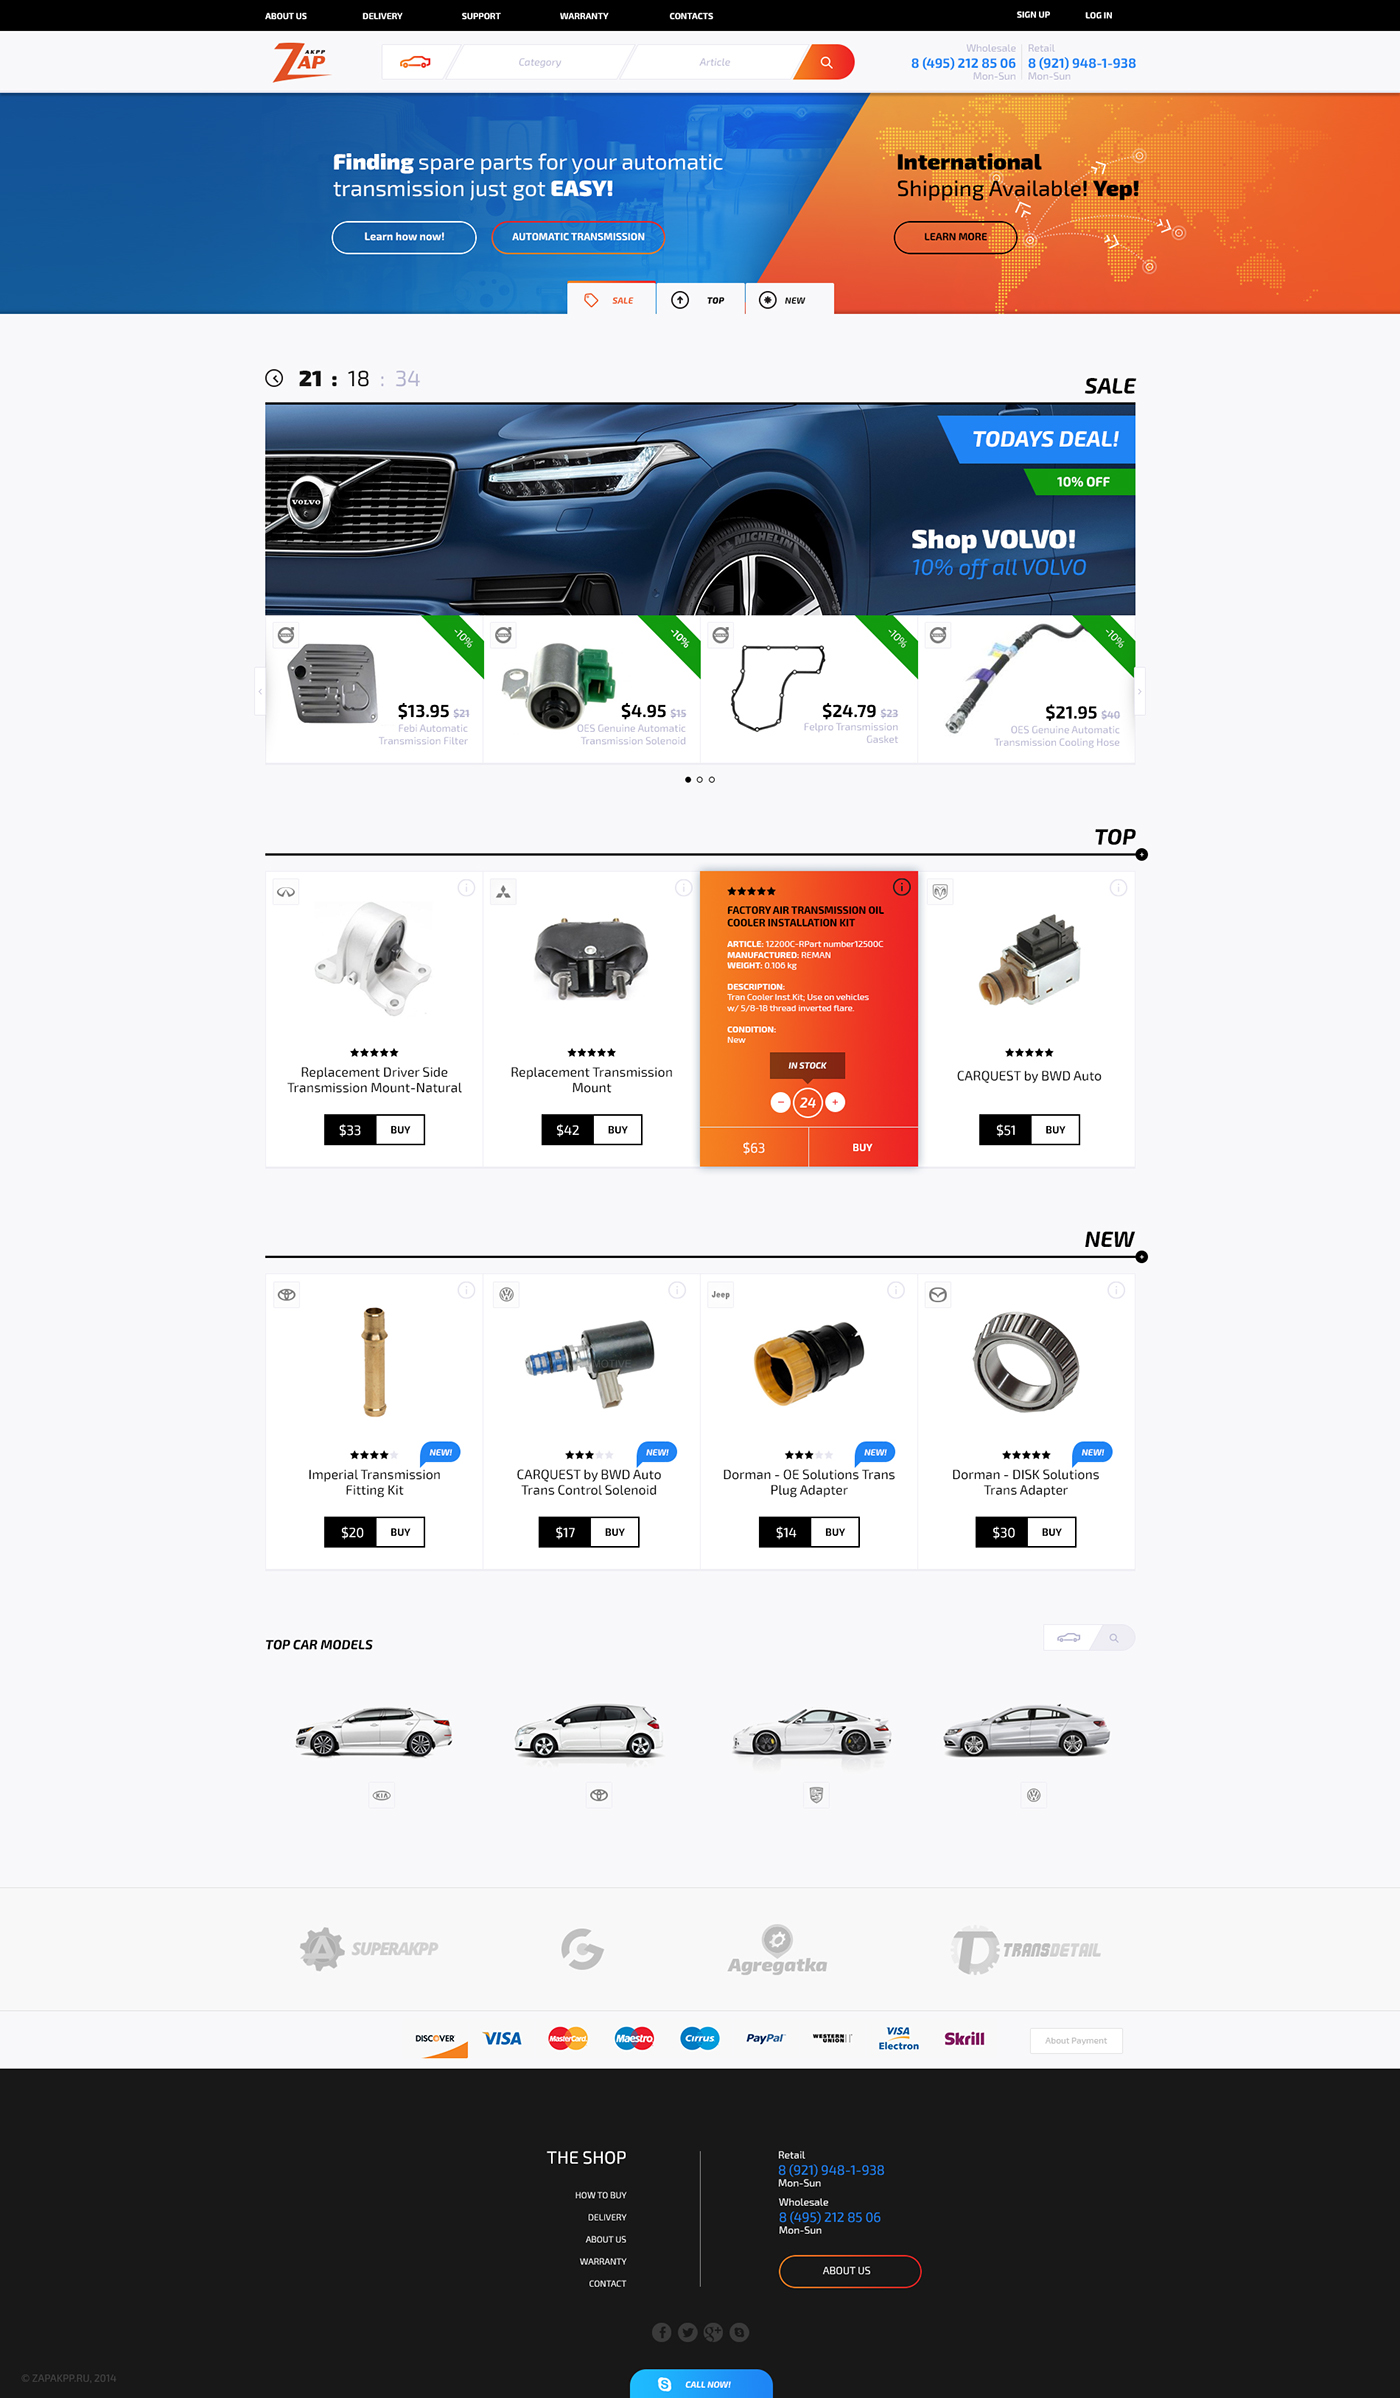 car drive parts tools deliver sell buy cart checkout transmition International store e-commerce buy online #Ps25Under25